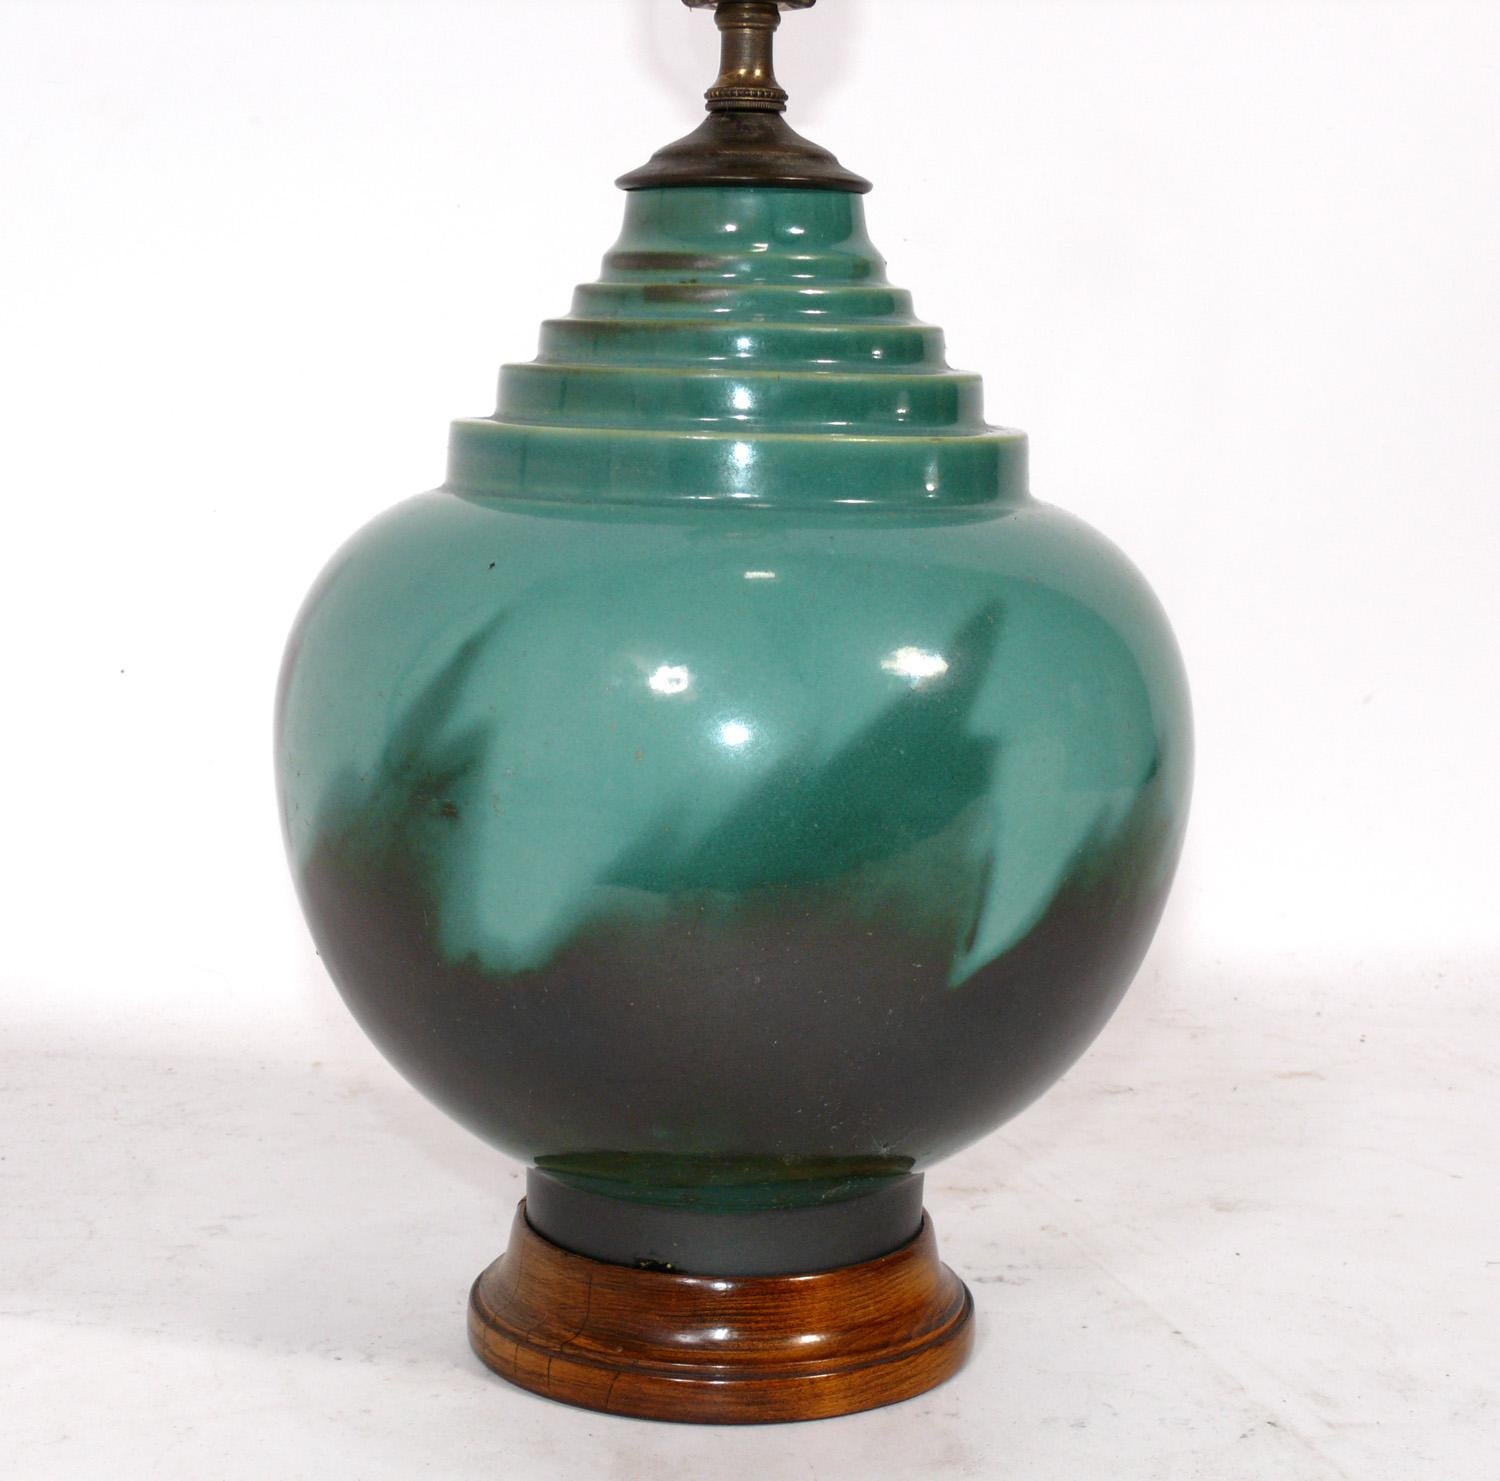 Roseville Futura Art Deco Lamp, American, circa 1930s. This is often called the 